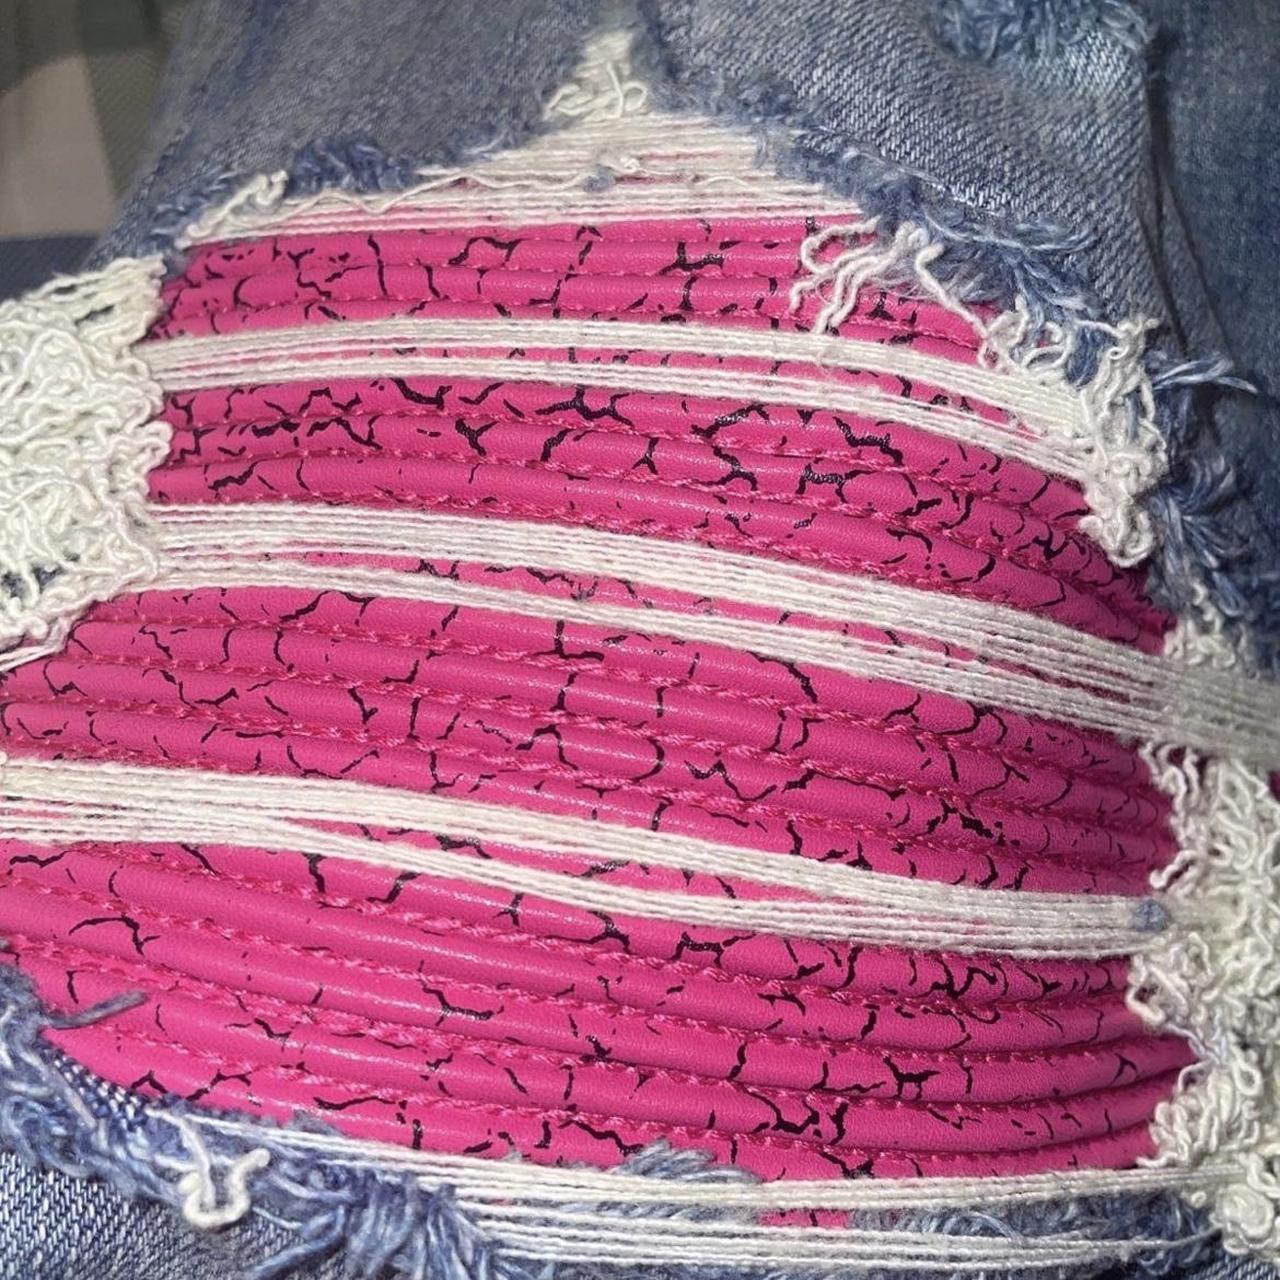 Amiri Jeans Mike Amiri jeans pink patches - Depop